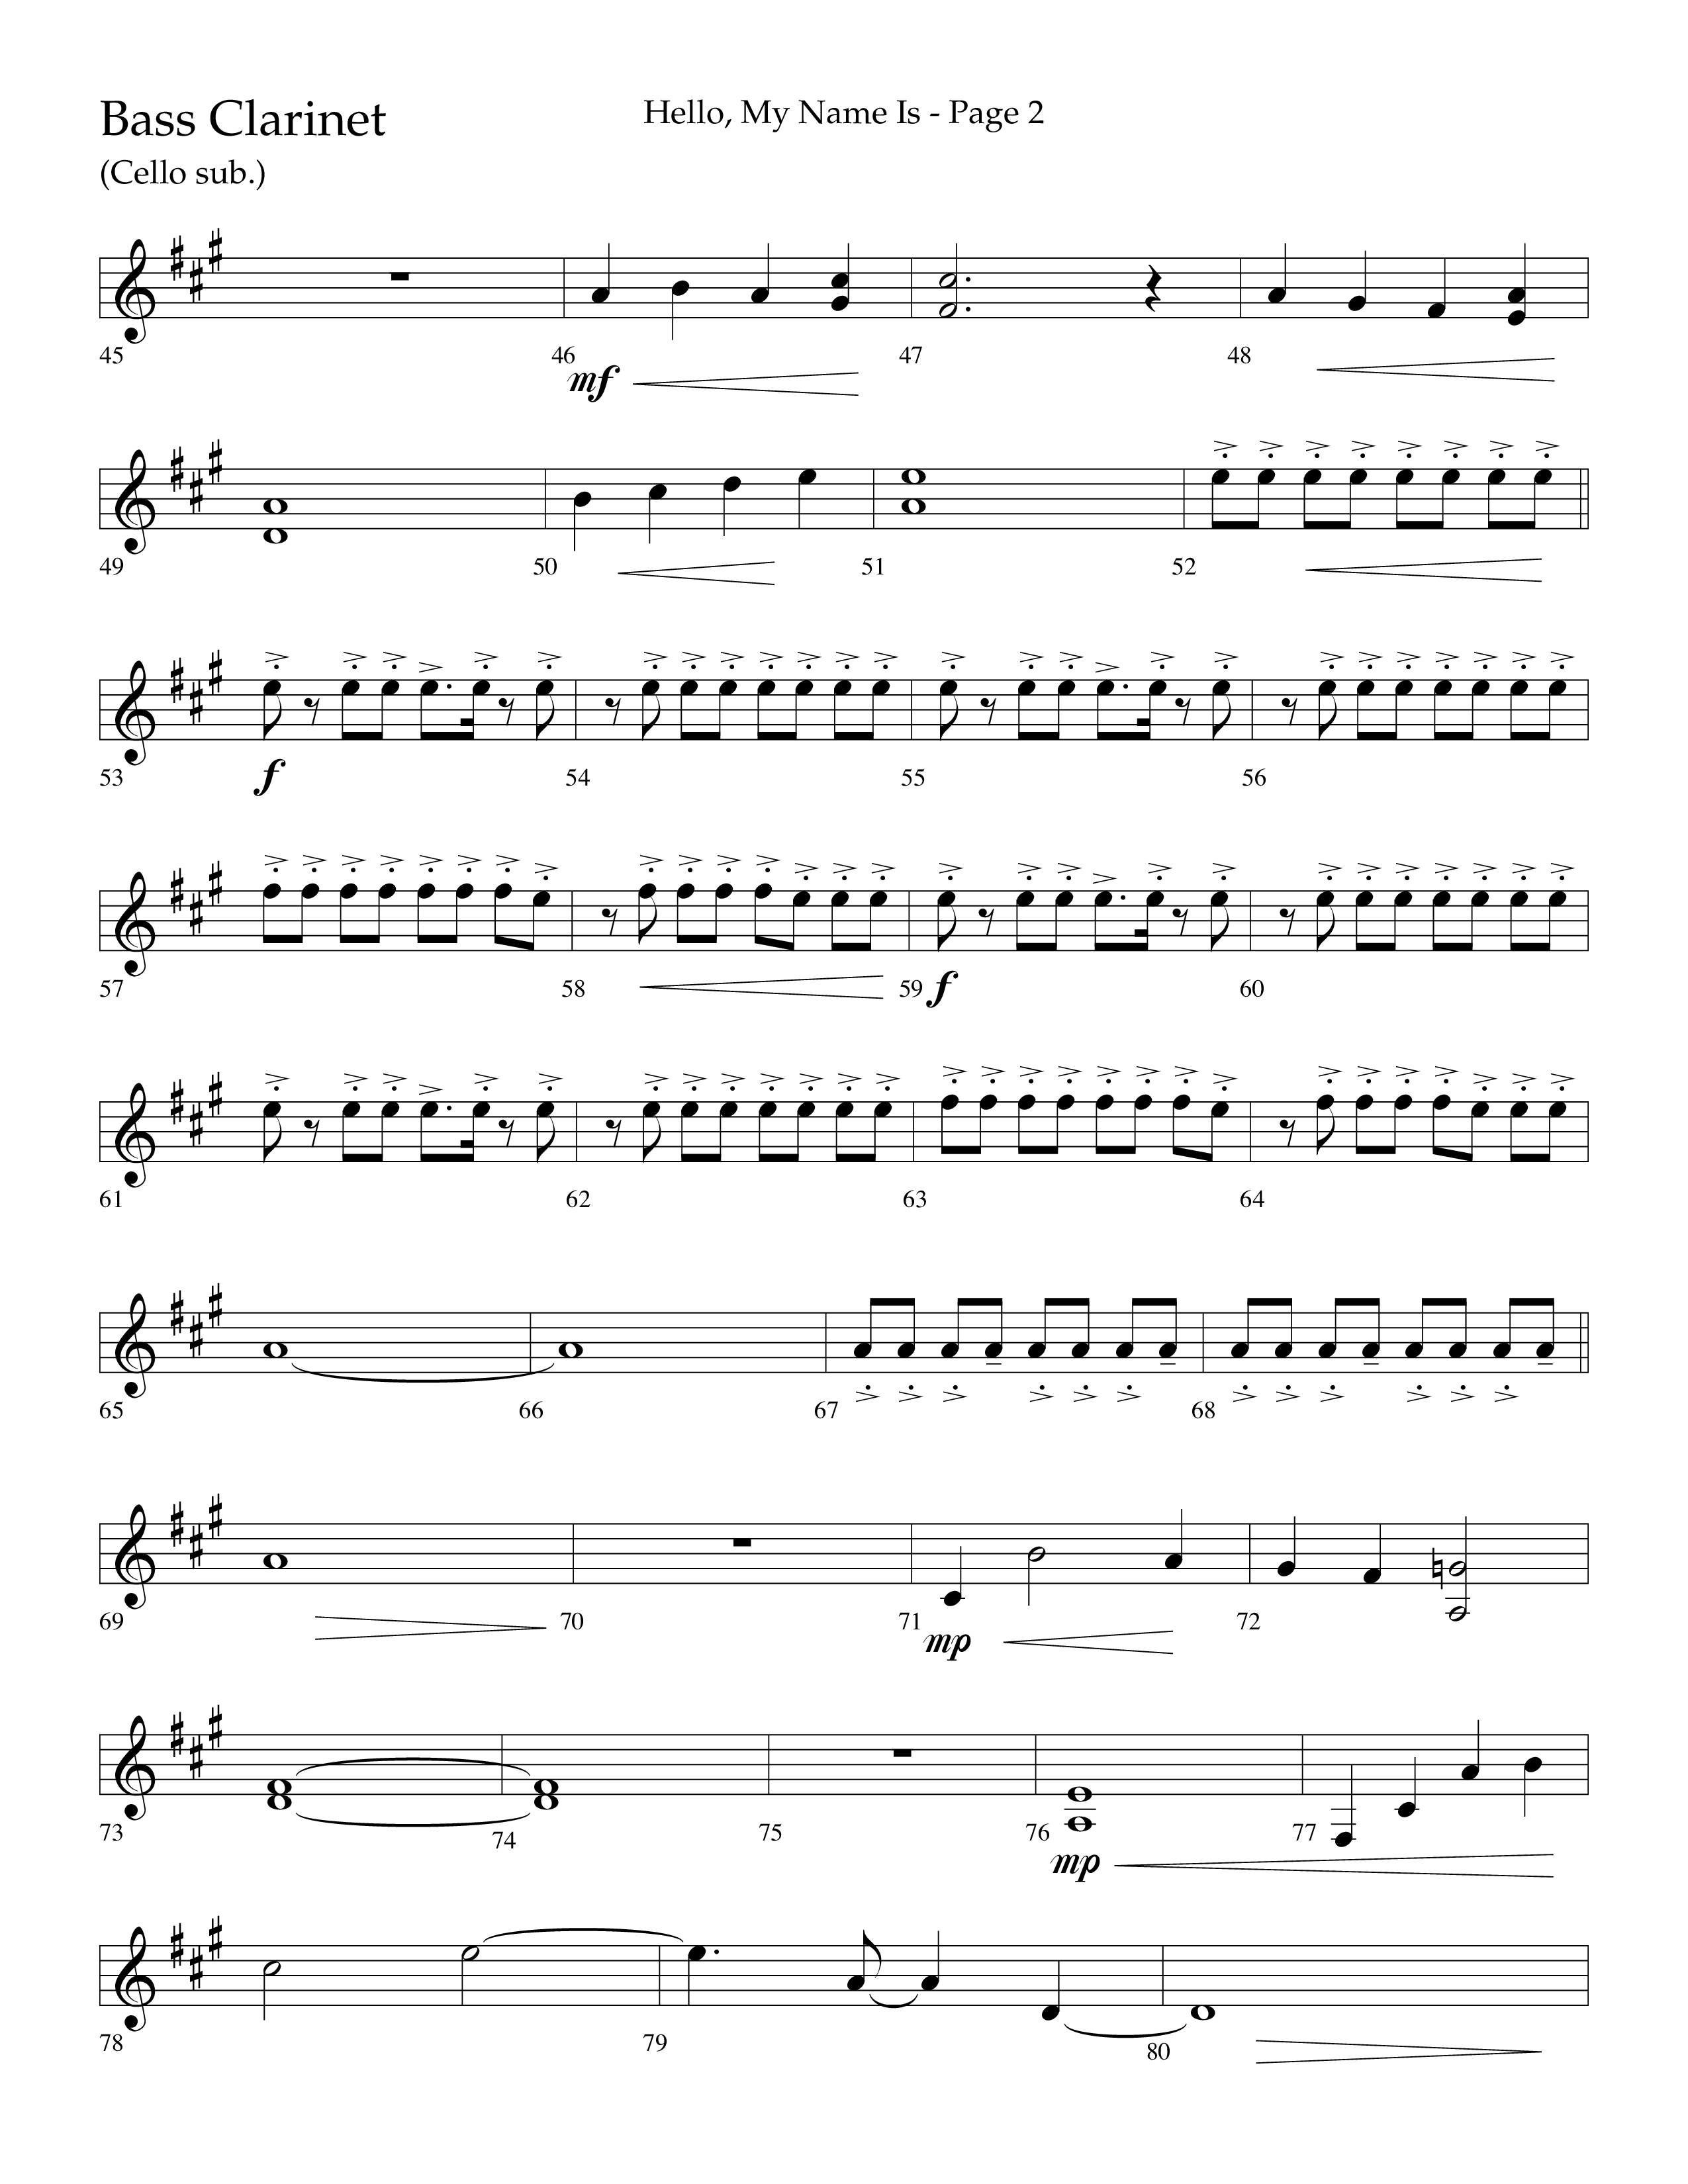 Hello My Name Is (Choral Anthem SATB) Bass Clarinet (Lifeway Choral / Arr. Jim Hammerly)